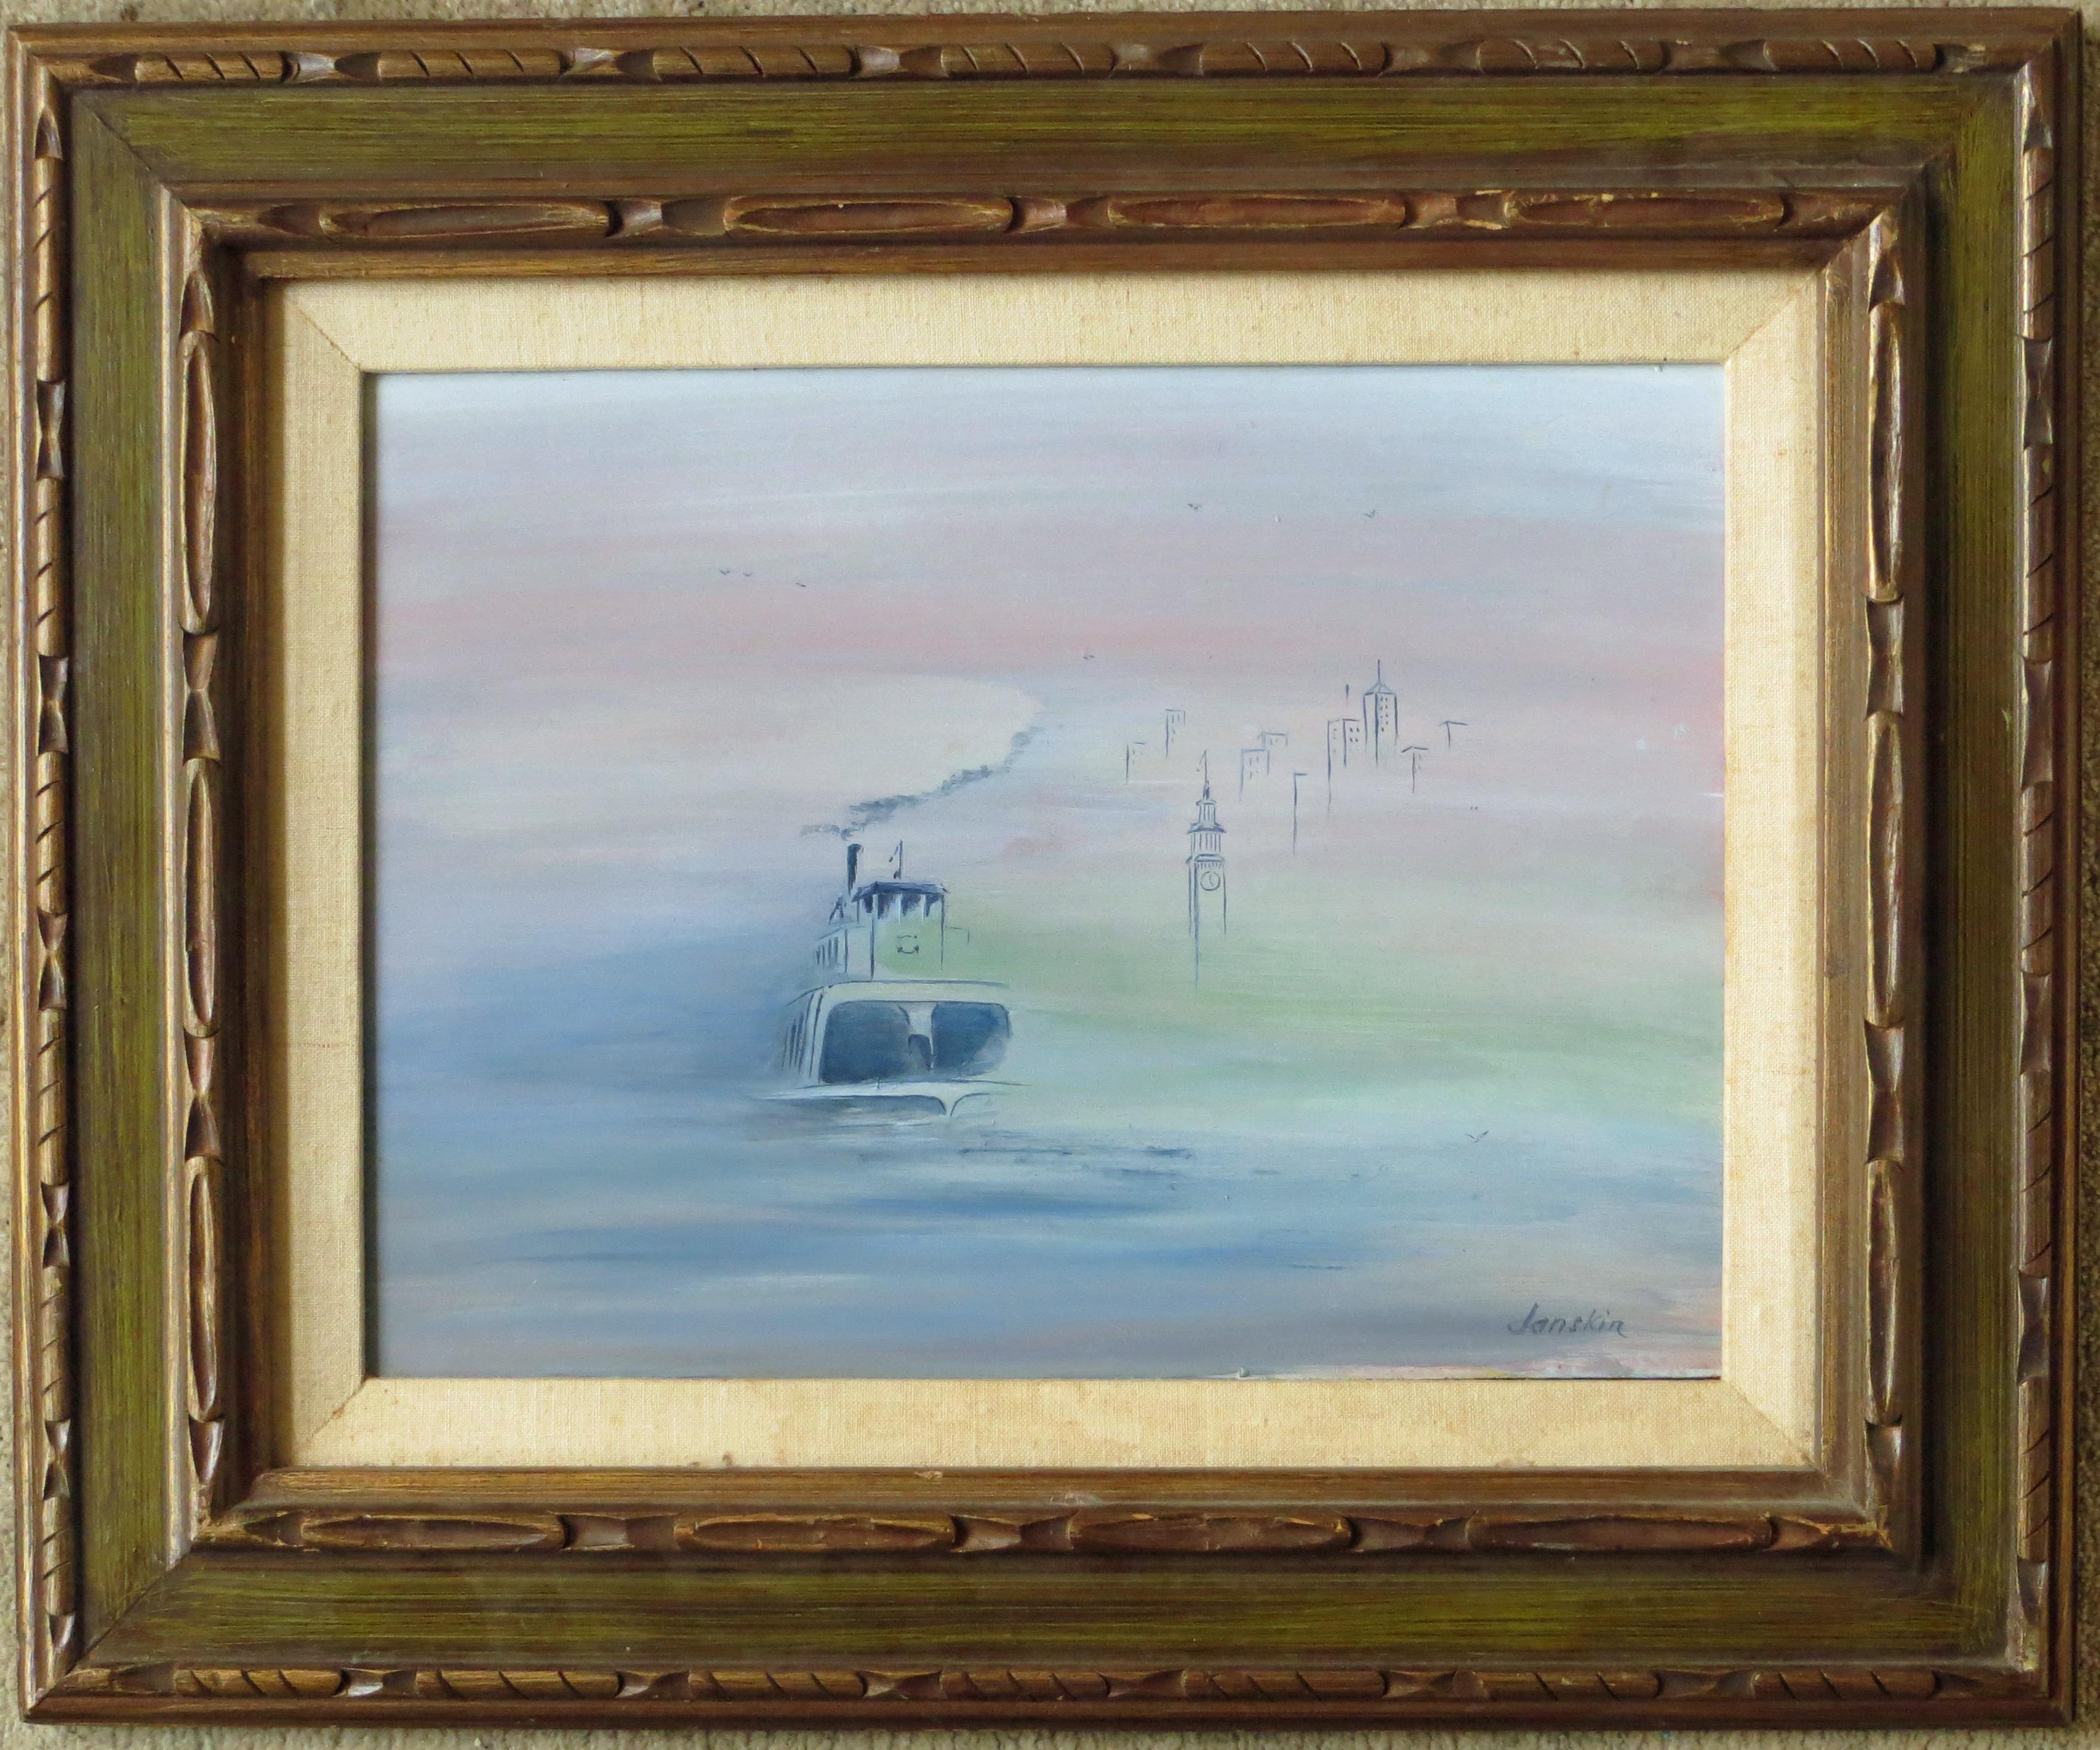 Untitled - San Francisco in the Fog - Painting by Richard Danskin